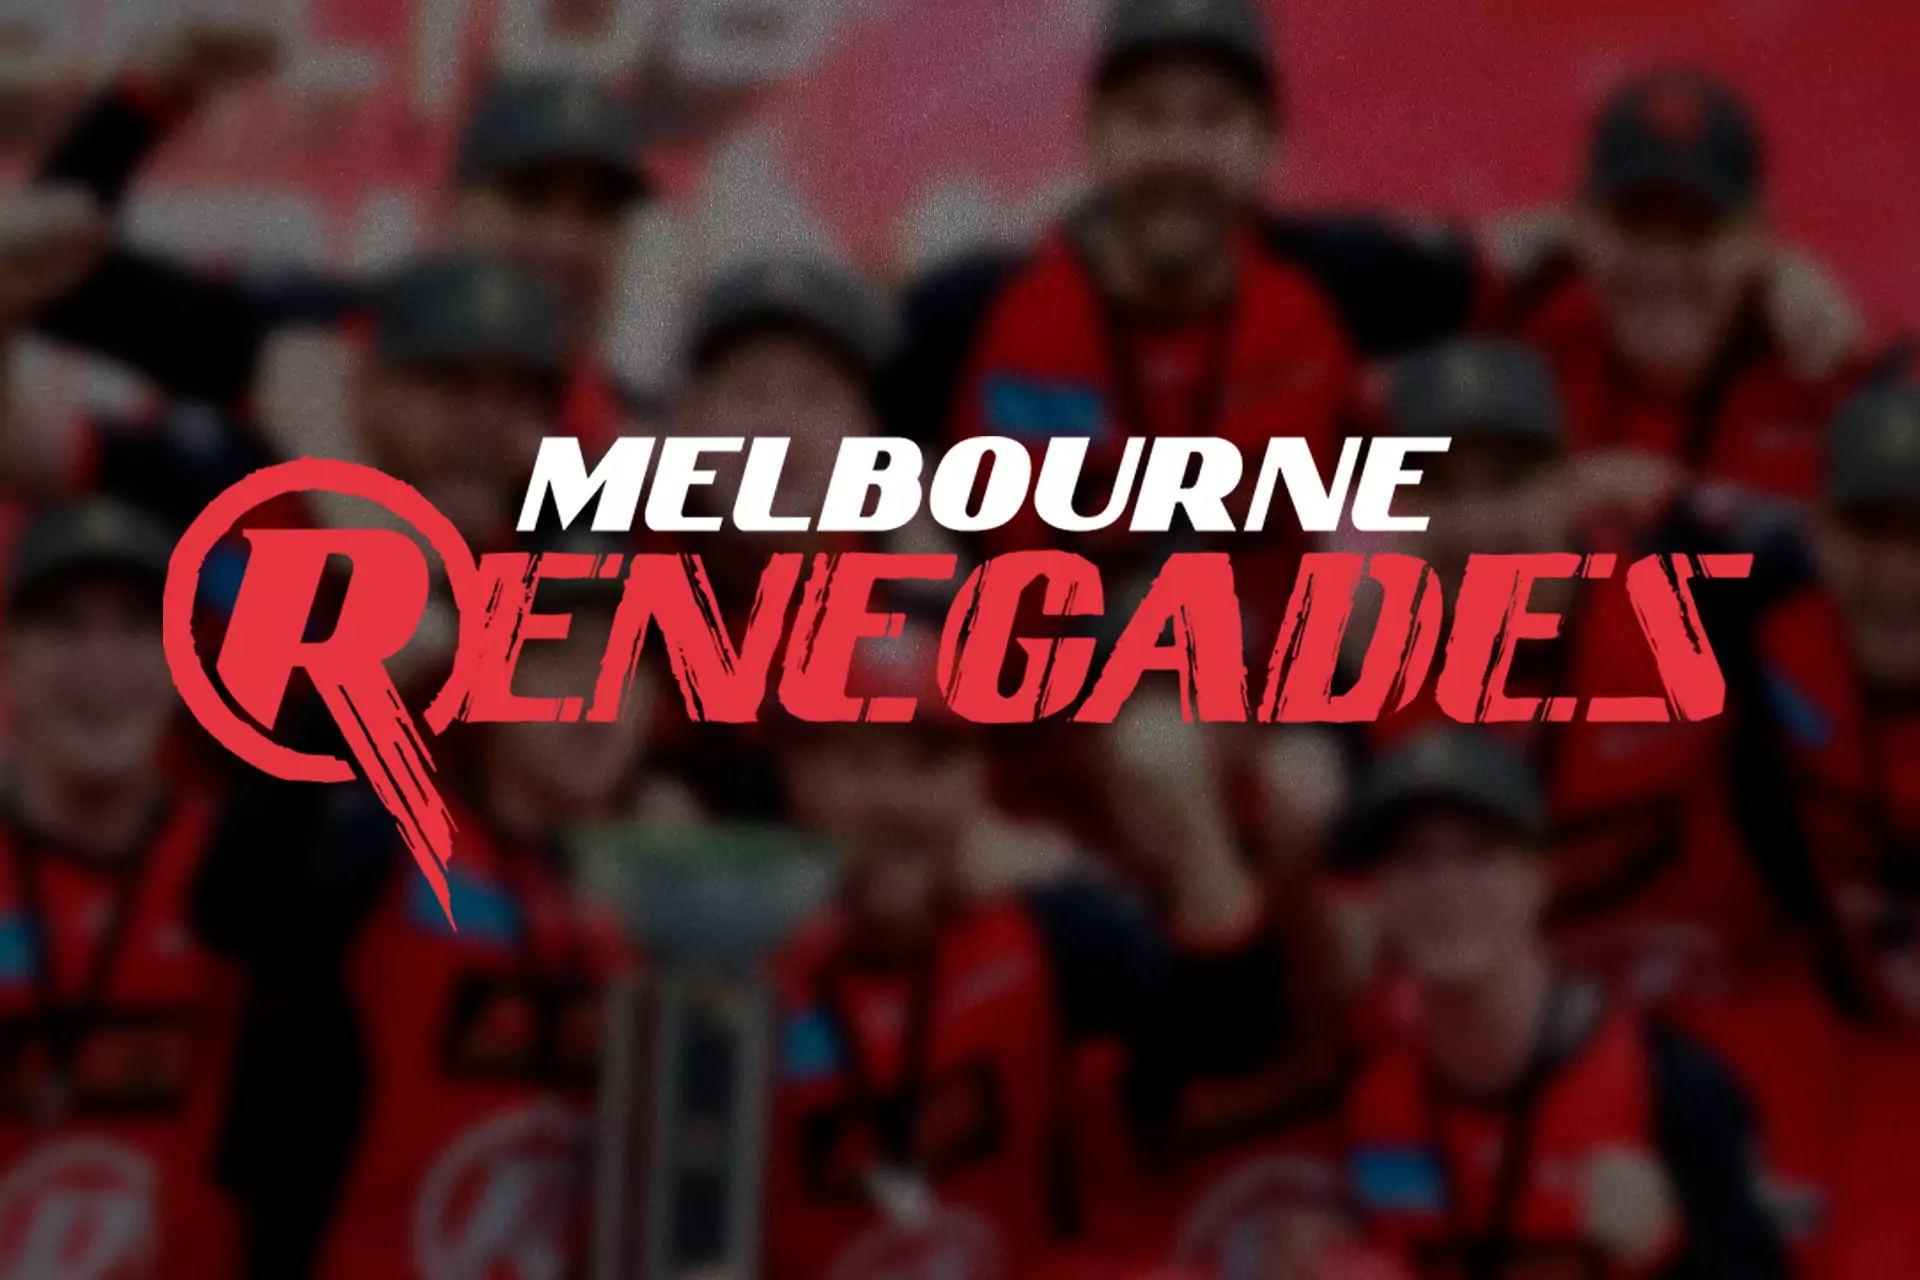 The Melbourne Renegades team shows good game each season and has many fans.